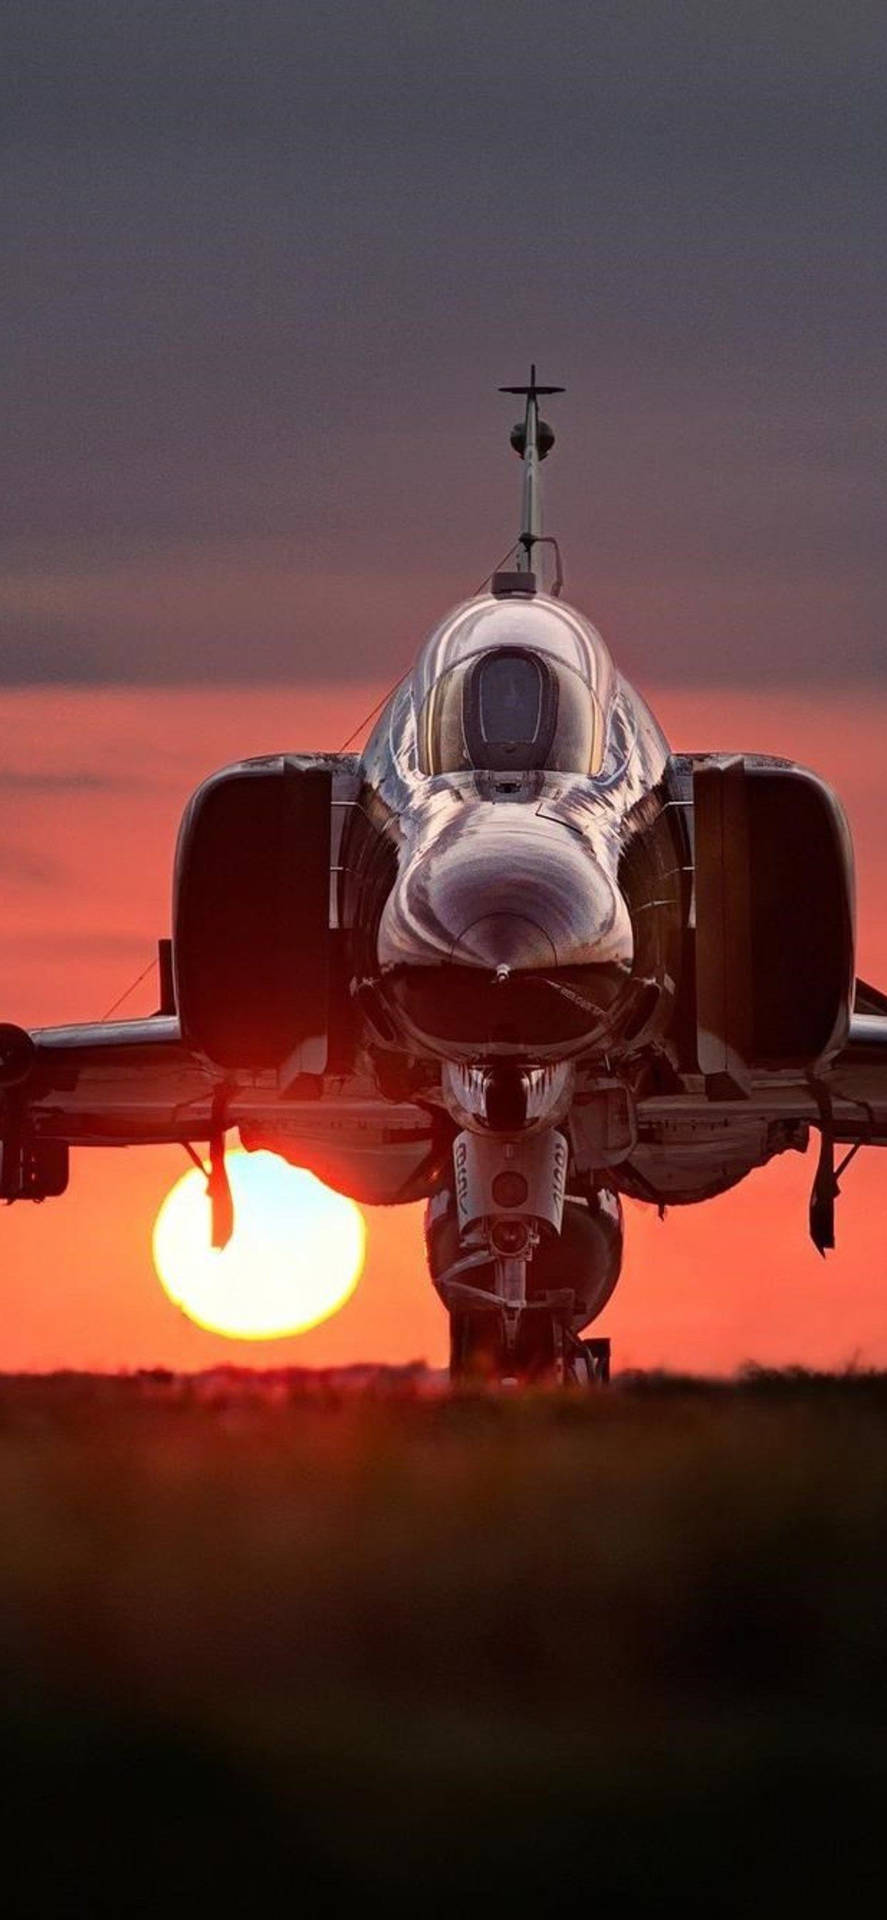 Jet Iphone Sunset View Background